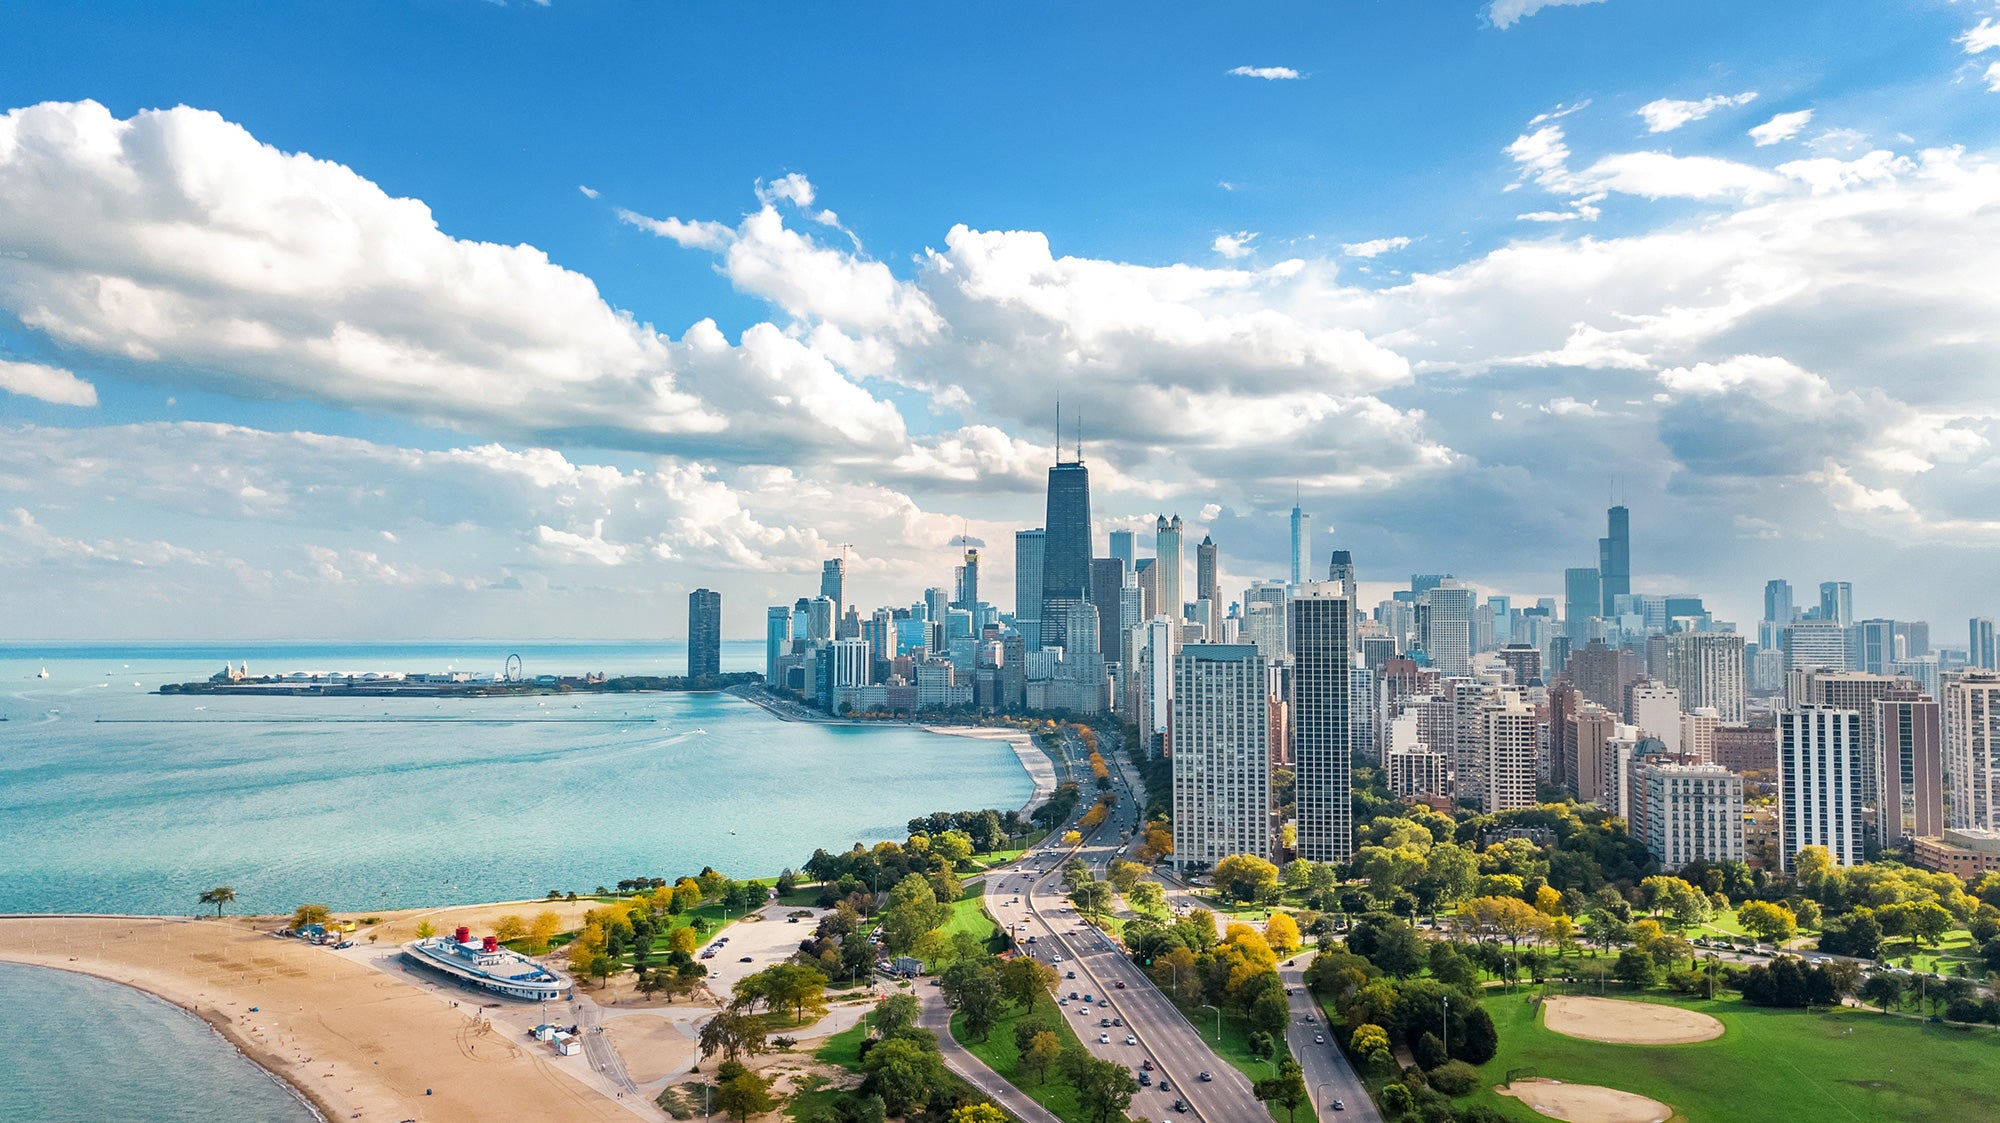 A photo of the Chicago skyline on a mild summer day.